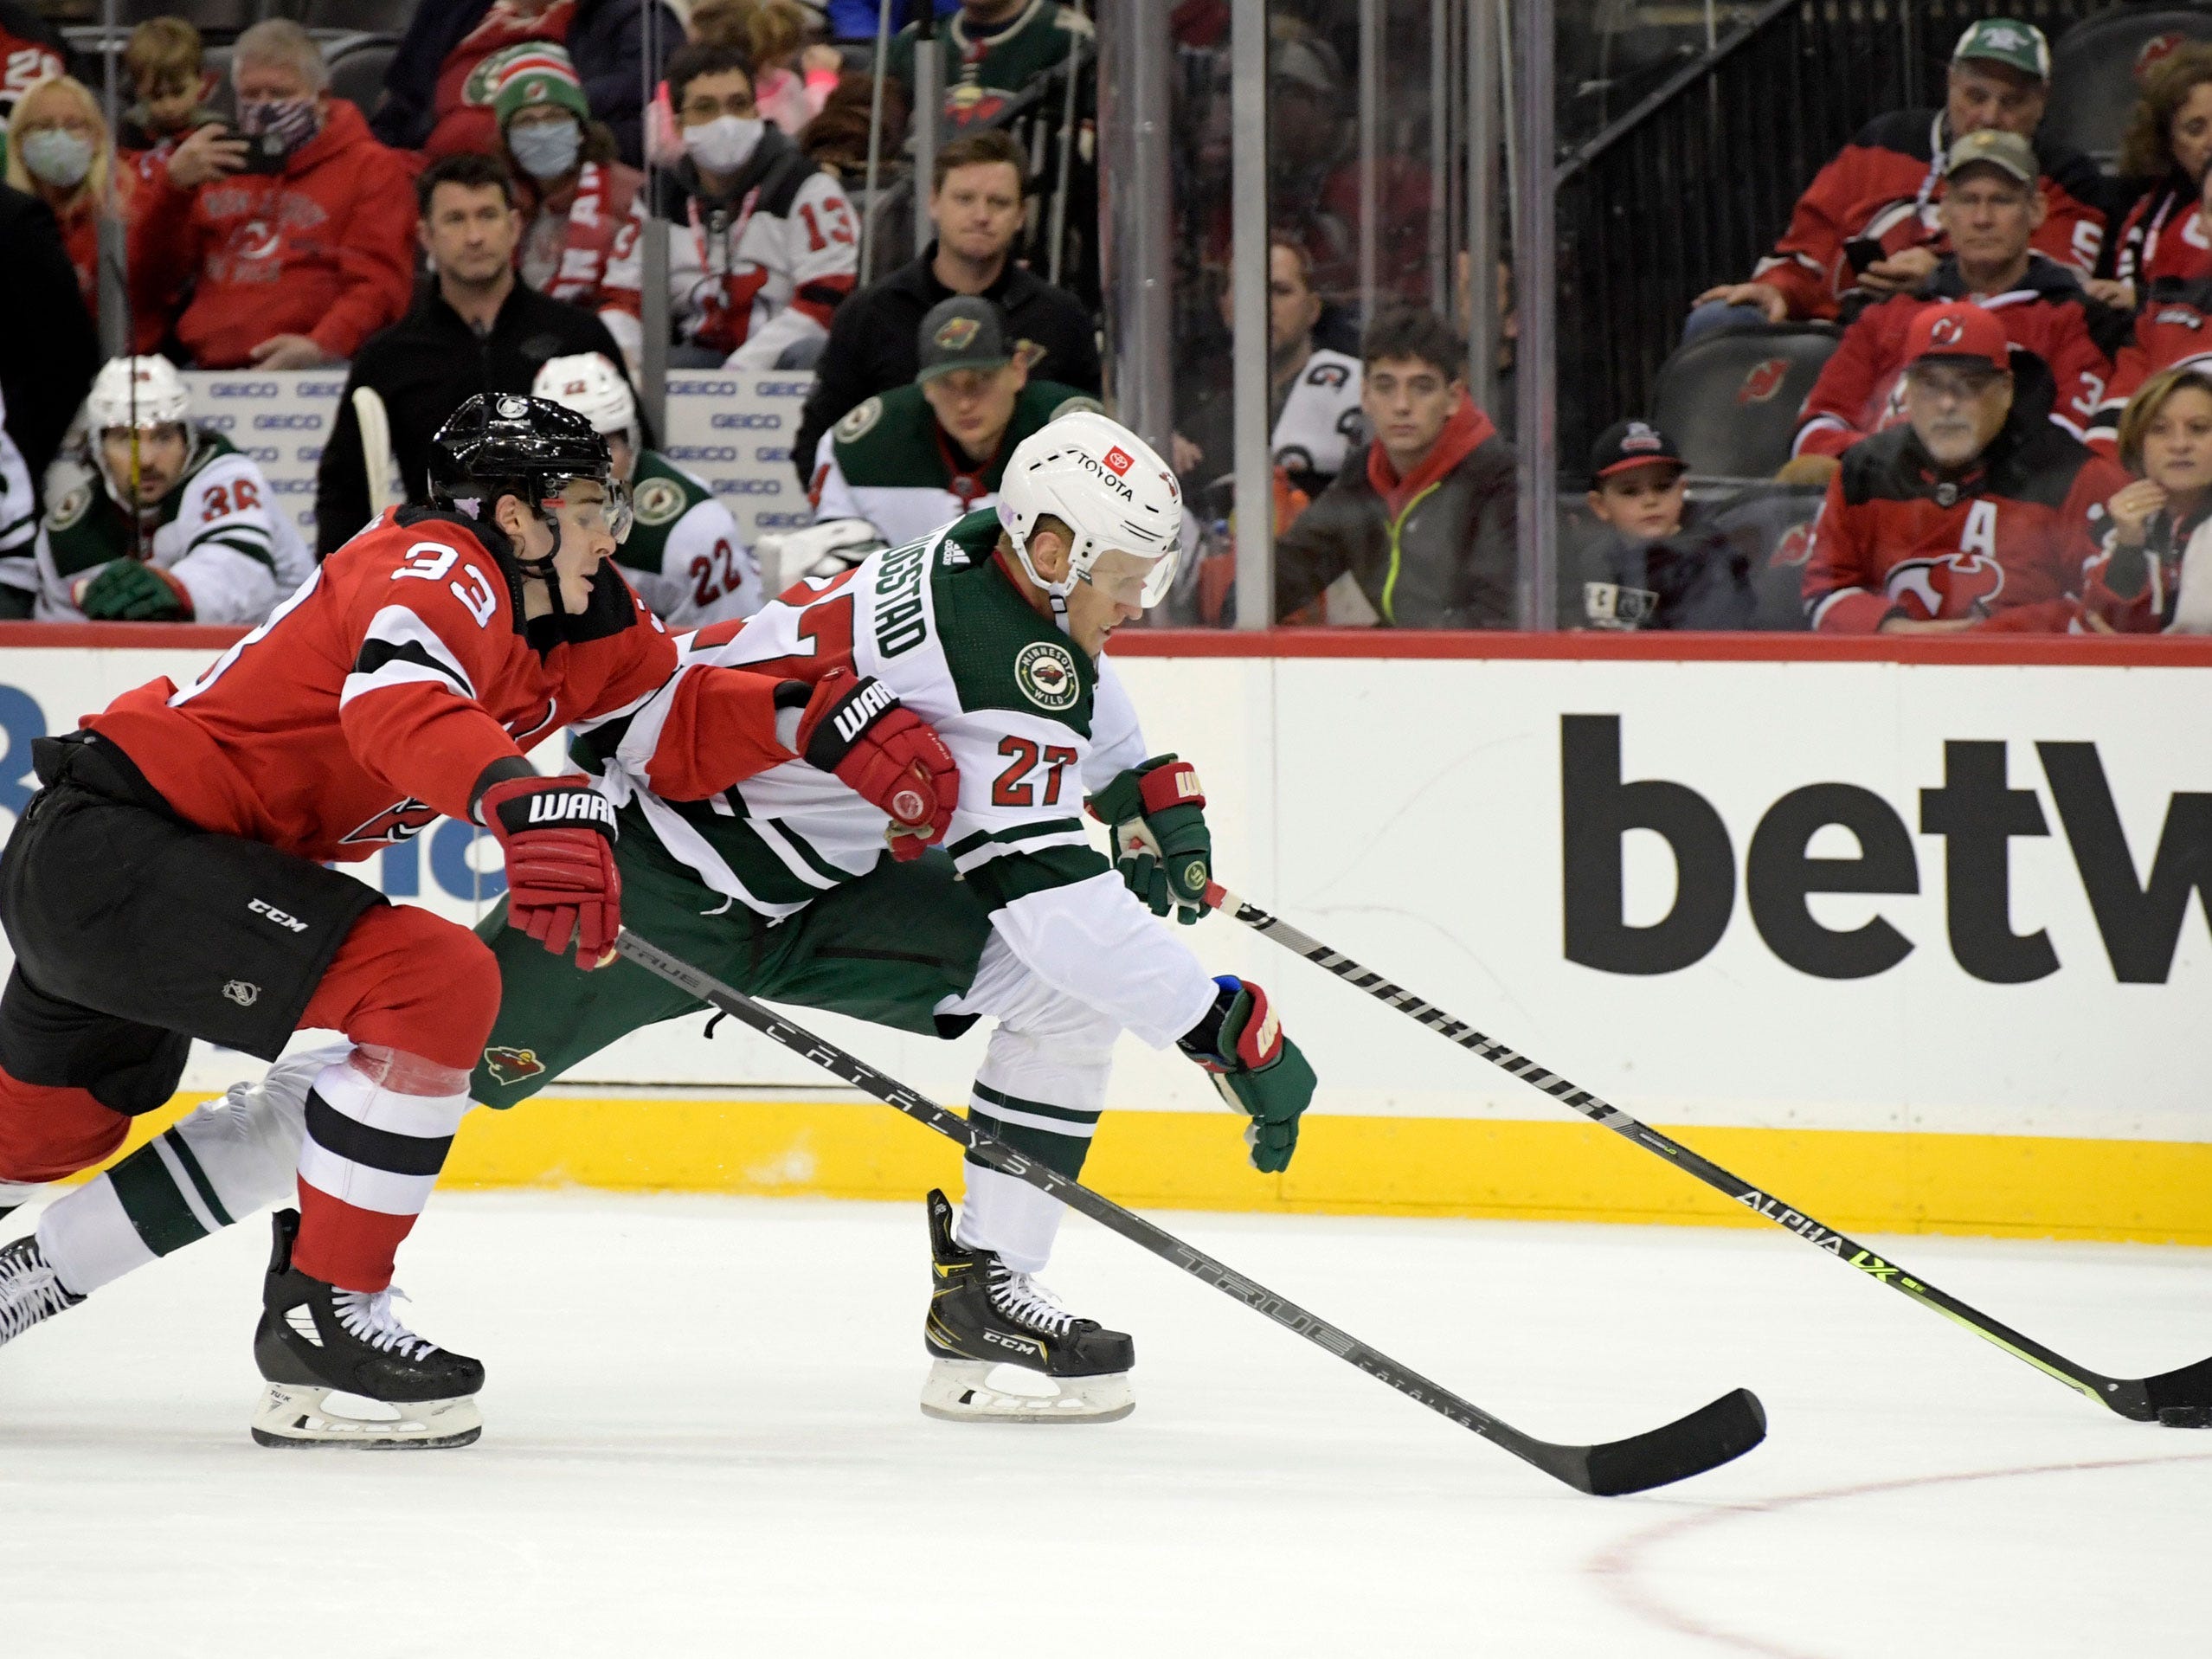 Minnesota Wild center Nick Bjugstad skates with the puck as he is pursued by New Jersey Devils defenseman Ryan Graves.